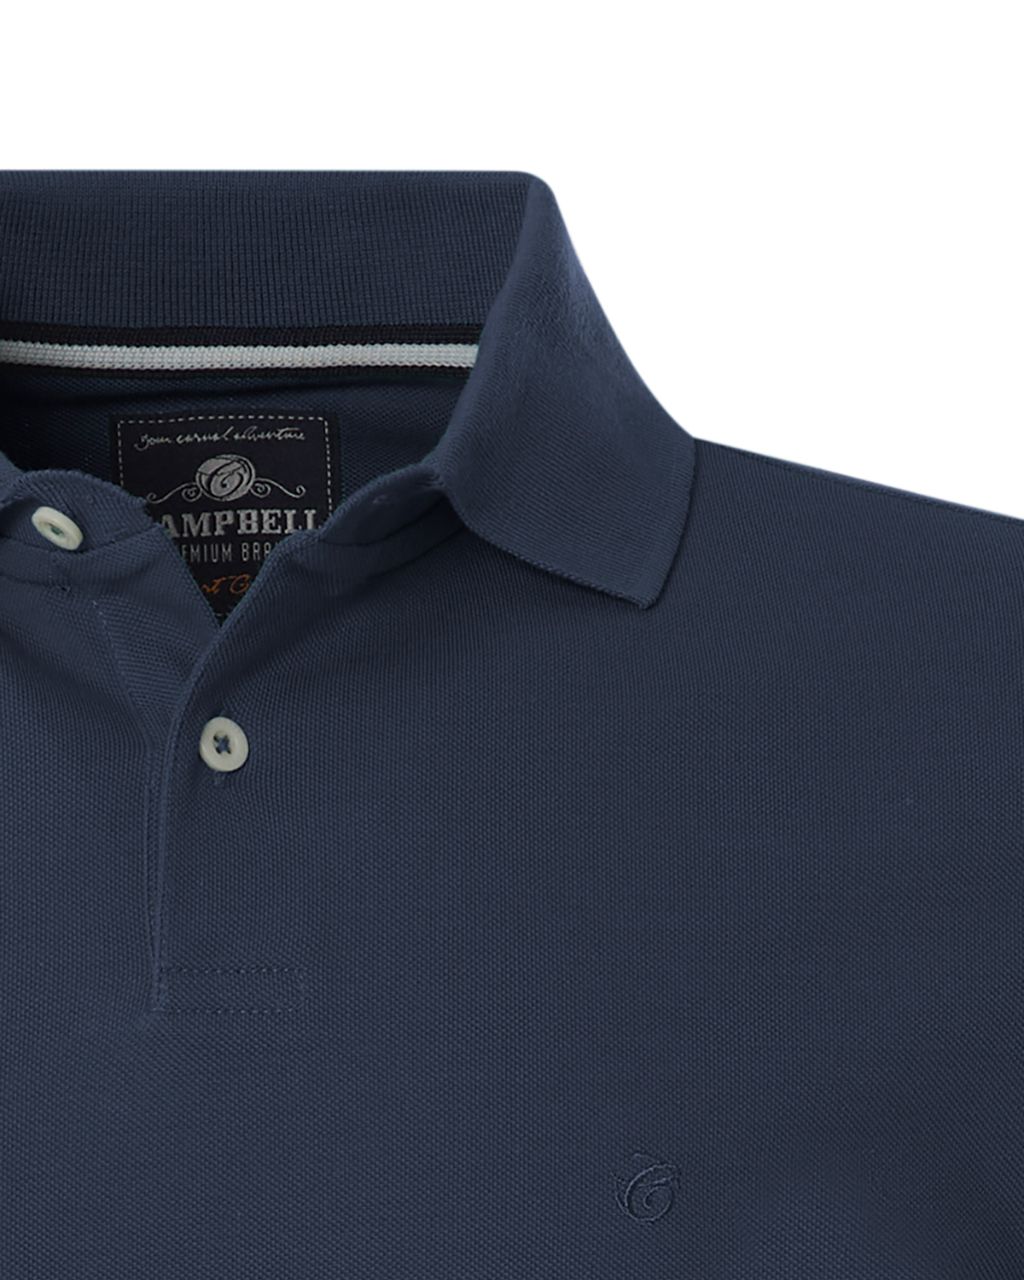 Campbell Classic Harton Polo LM Donkerblauw uni 077568-001-L